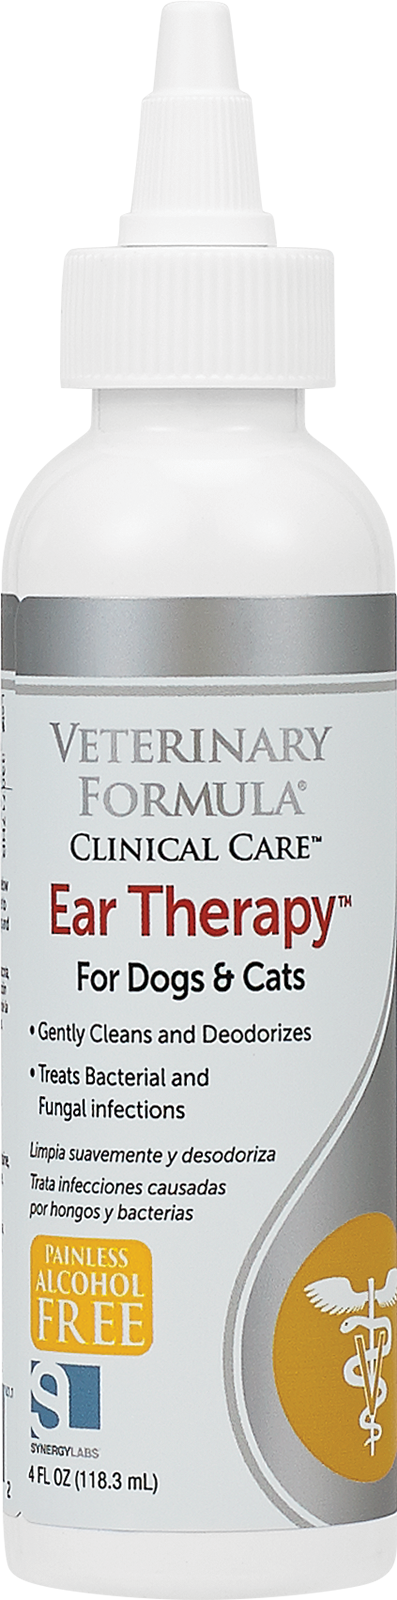 VETERINARY FORMULA CLINICAL CARE EAR THERAPY 4OZ